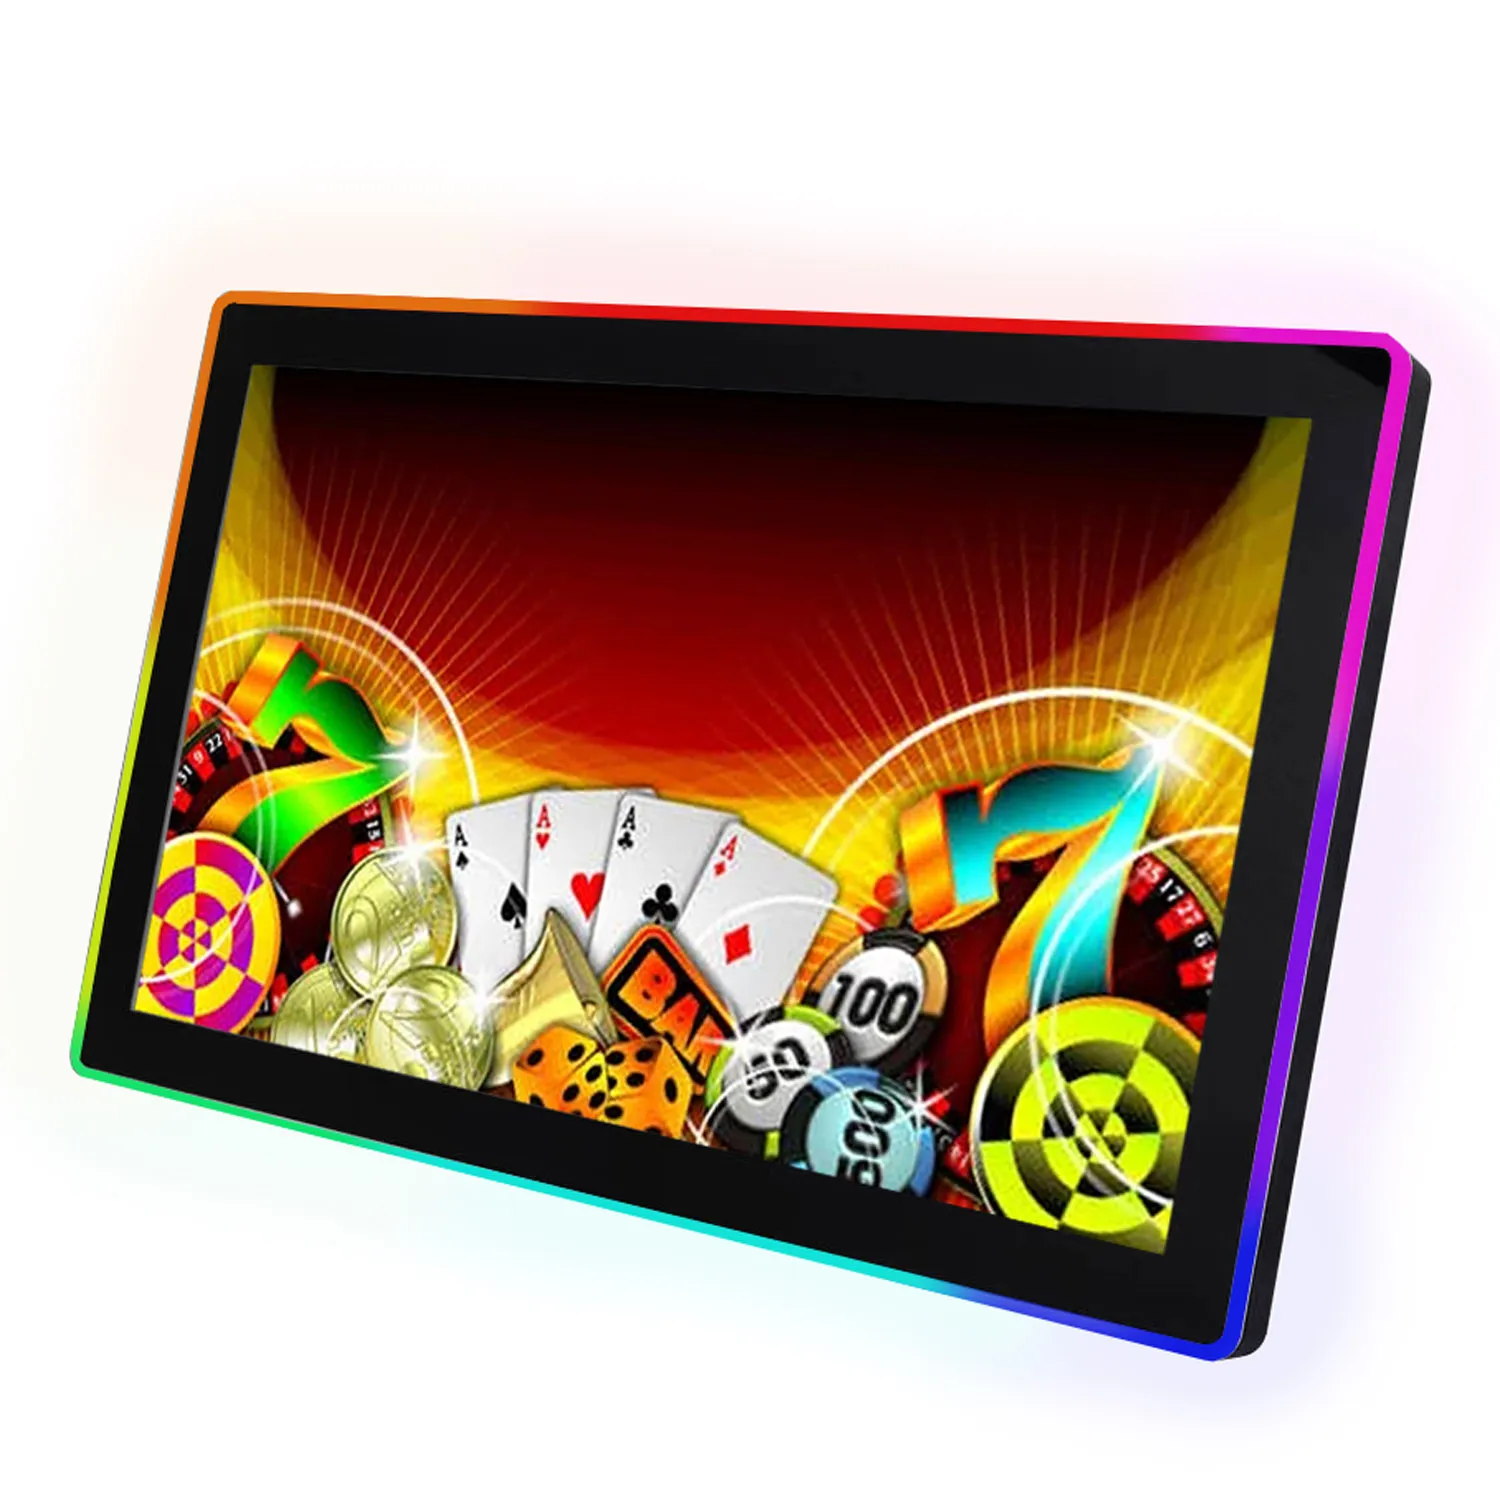 INDUSTRIAL OPEN FRAME TOUCH MONITOR KEETOUCH 15,6” KT-156-CW0S0L1 WITH LED STRIP UNDER THE TOUCH PANEL